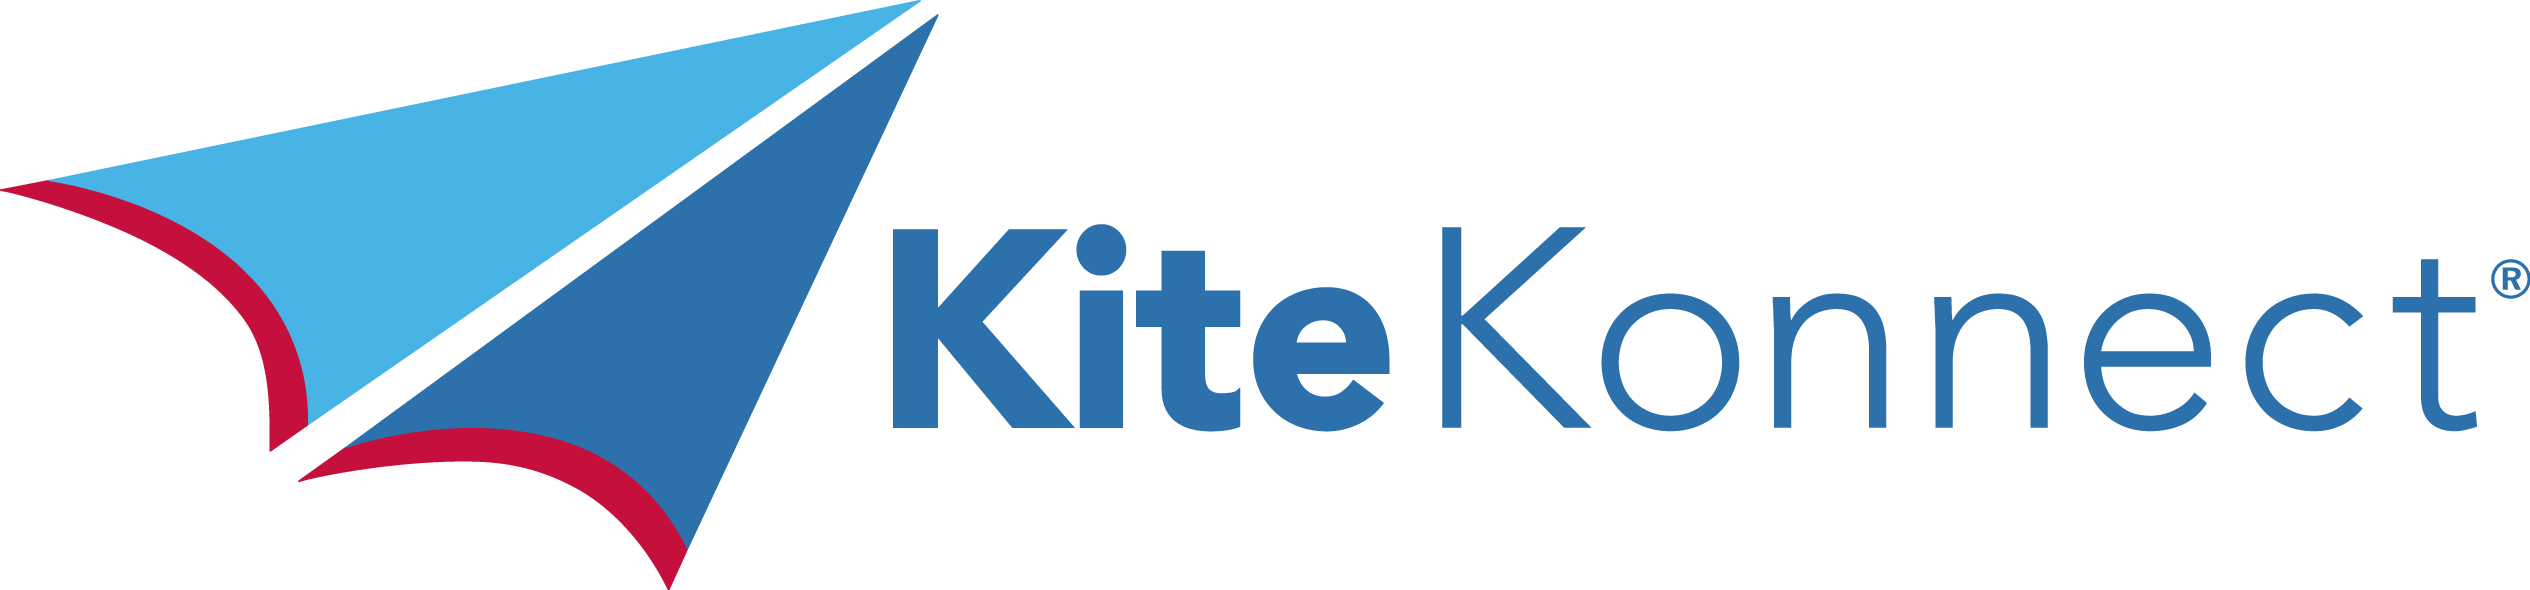 VVisit Kite Konnect, your resource throughout the treatment process.